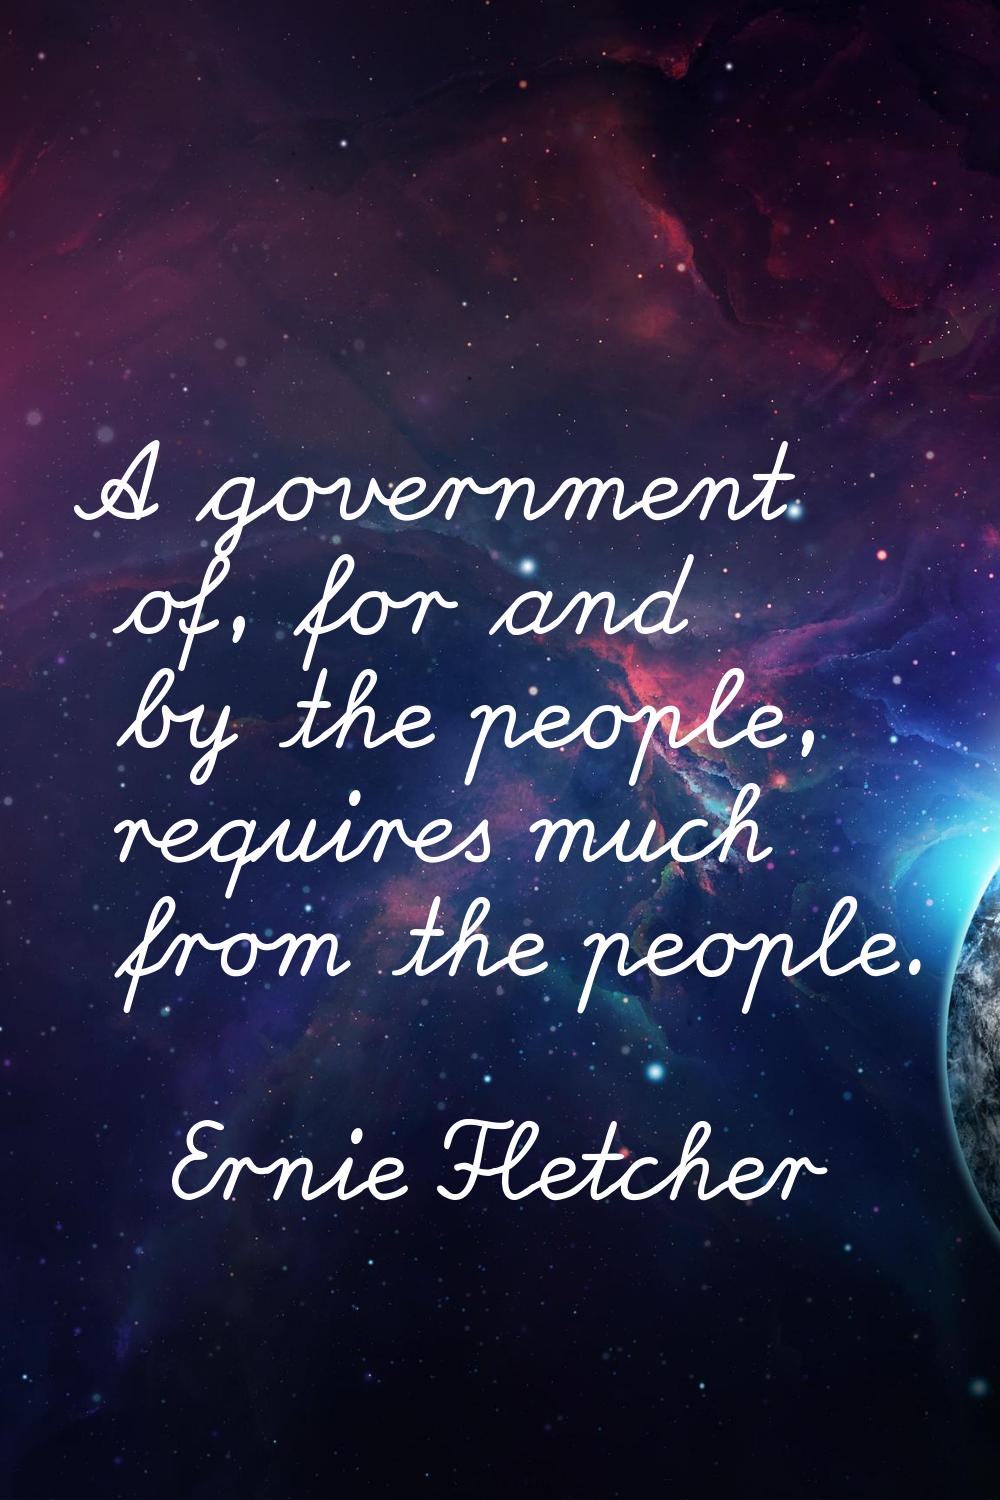 A government of, for and by the people, requires much from the people.